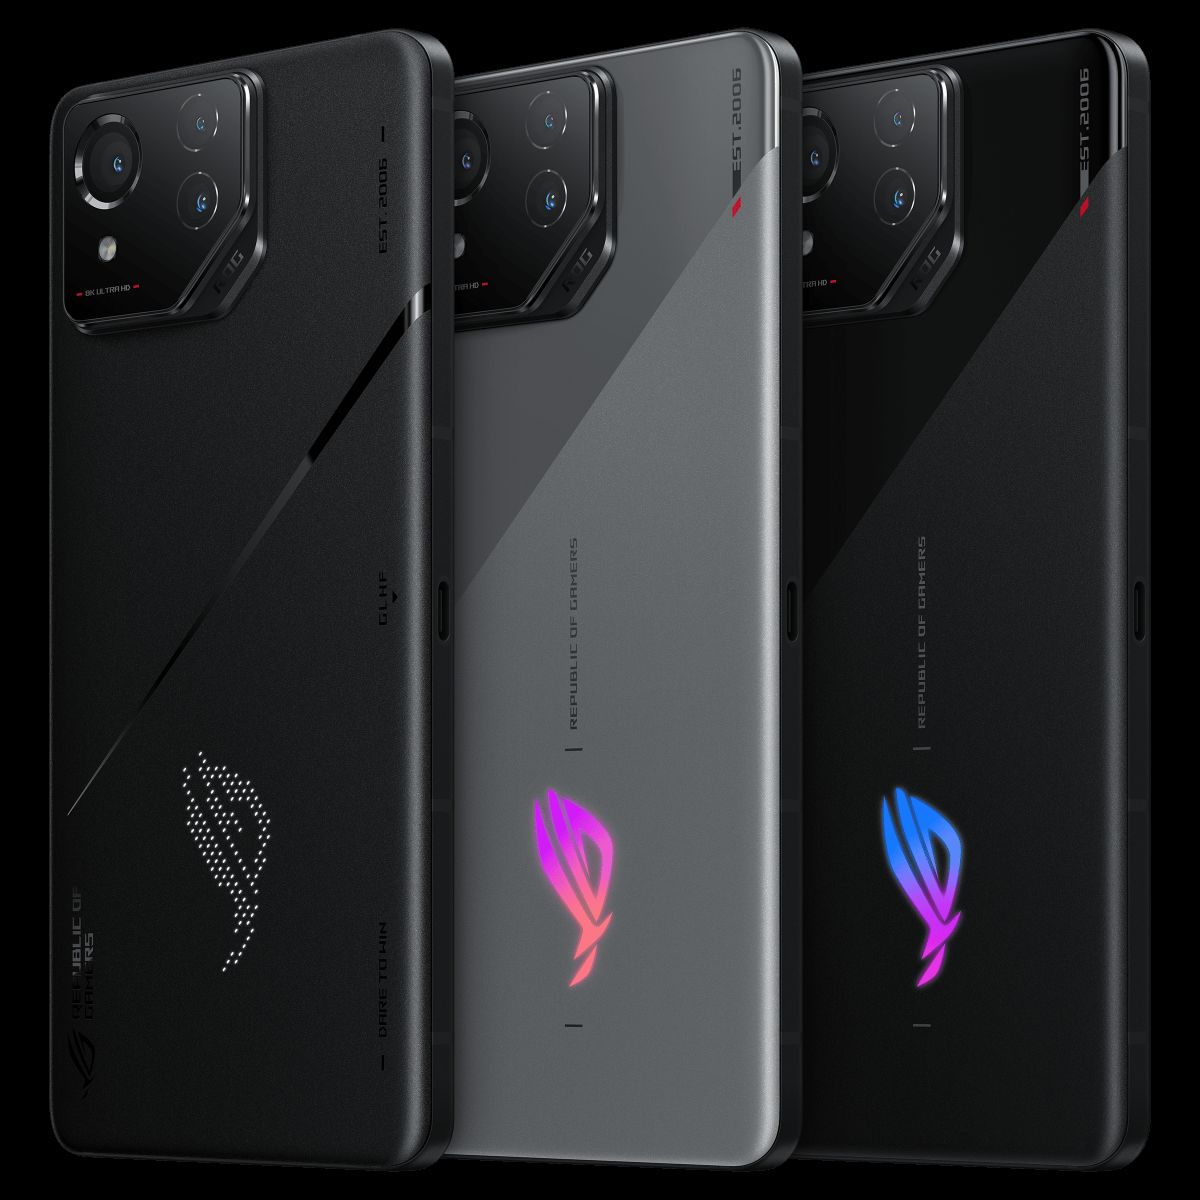 Asus ROG Phone 8 series brings AI features, 3x telephoto, and more: Details